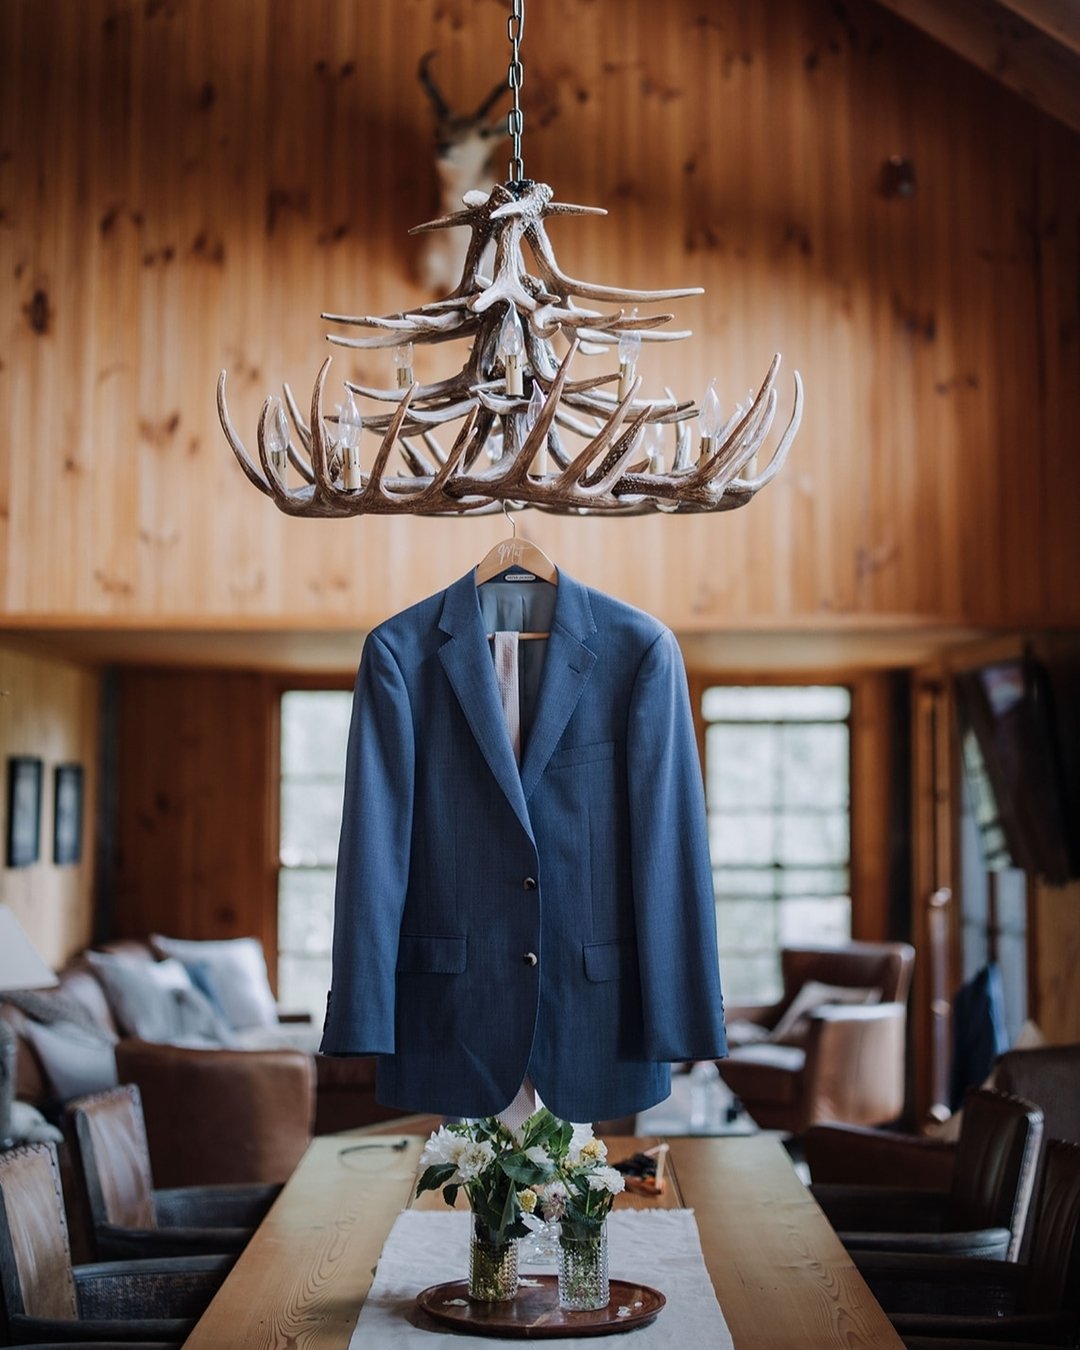 Behind the scenes at our lodge: Matt gearing up for his big day 🙌🏼

Our Lodge was the perfect space for Matt and his groomsmen to chill out and get ready, with its rustic country charm and room for 10 to stay.

Captured by @andymacweddings
#Waldara